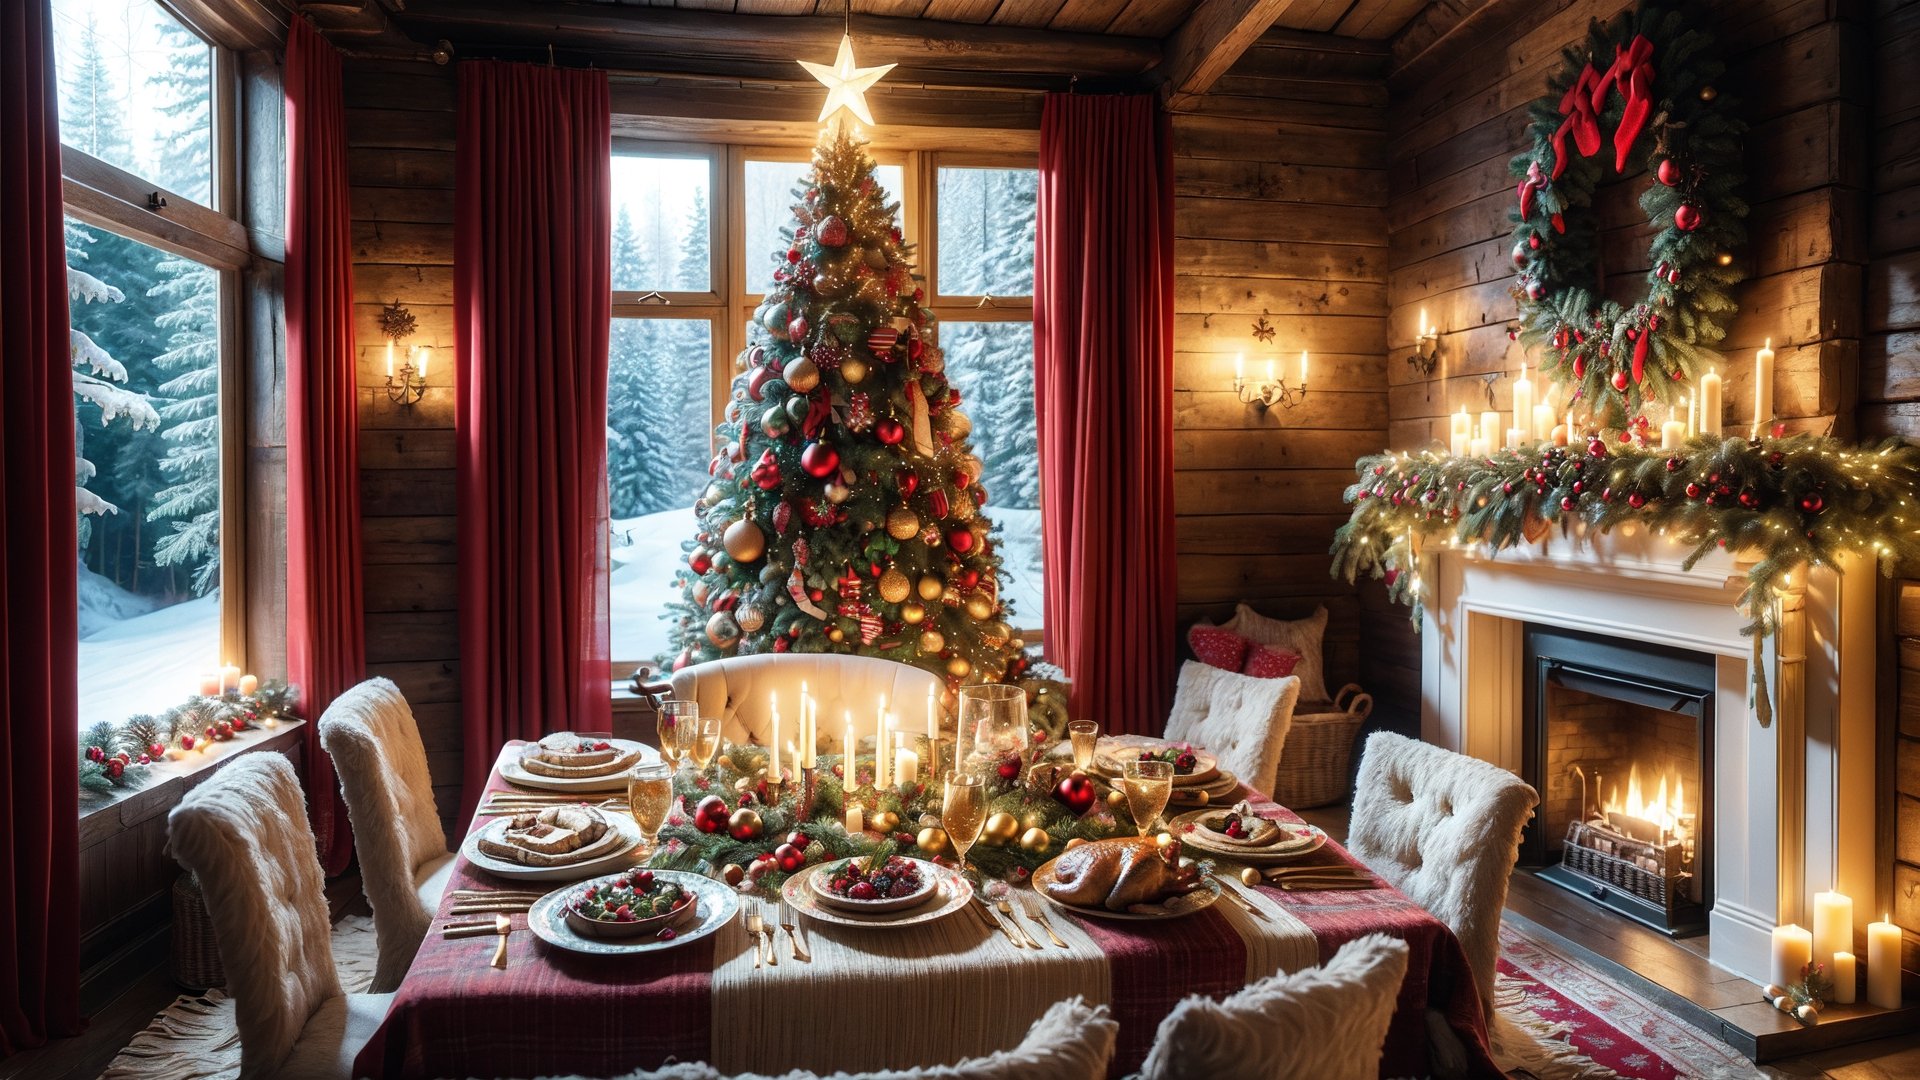 Festivals, In winter, Girls have dinner with Santa Claus, Christmas, Christmas tree, 
Christmas presents, Christmas tea, window overlooking a magical forest, curtains on the window, magic, Christmas background, Mysterious, Mysterious, Christmas Room, A sumptuous feast, 